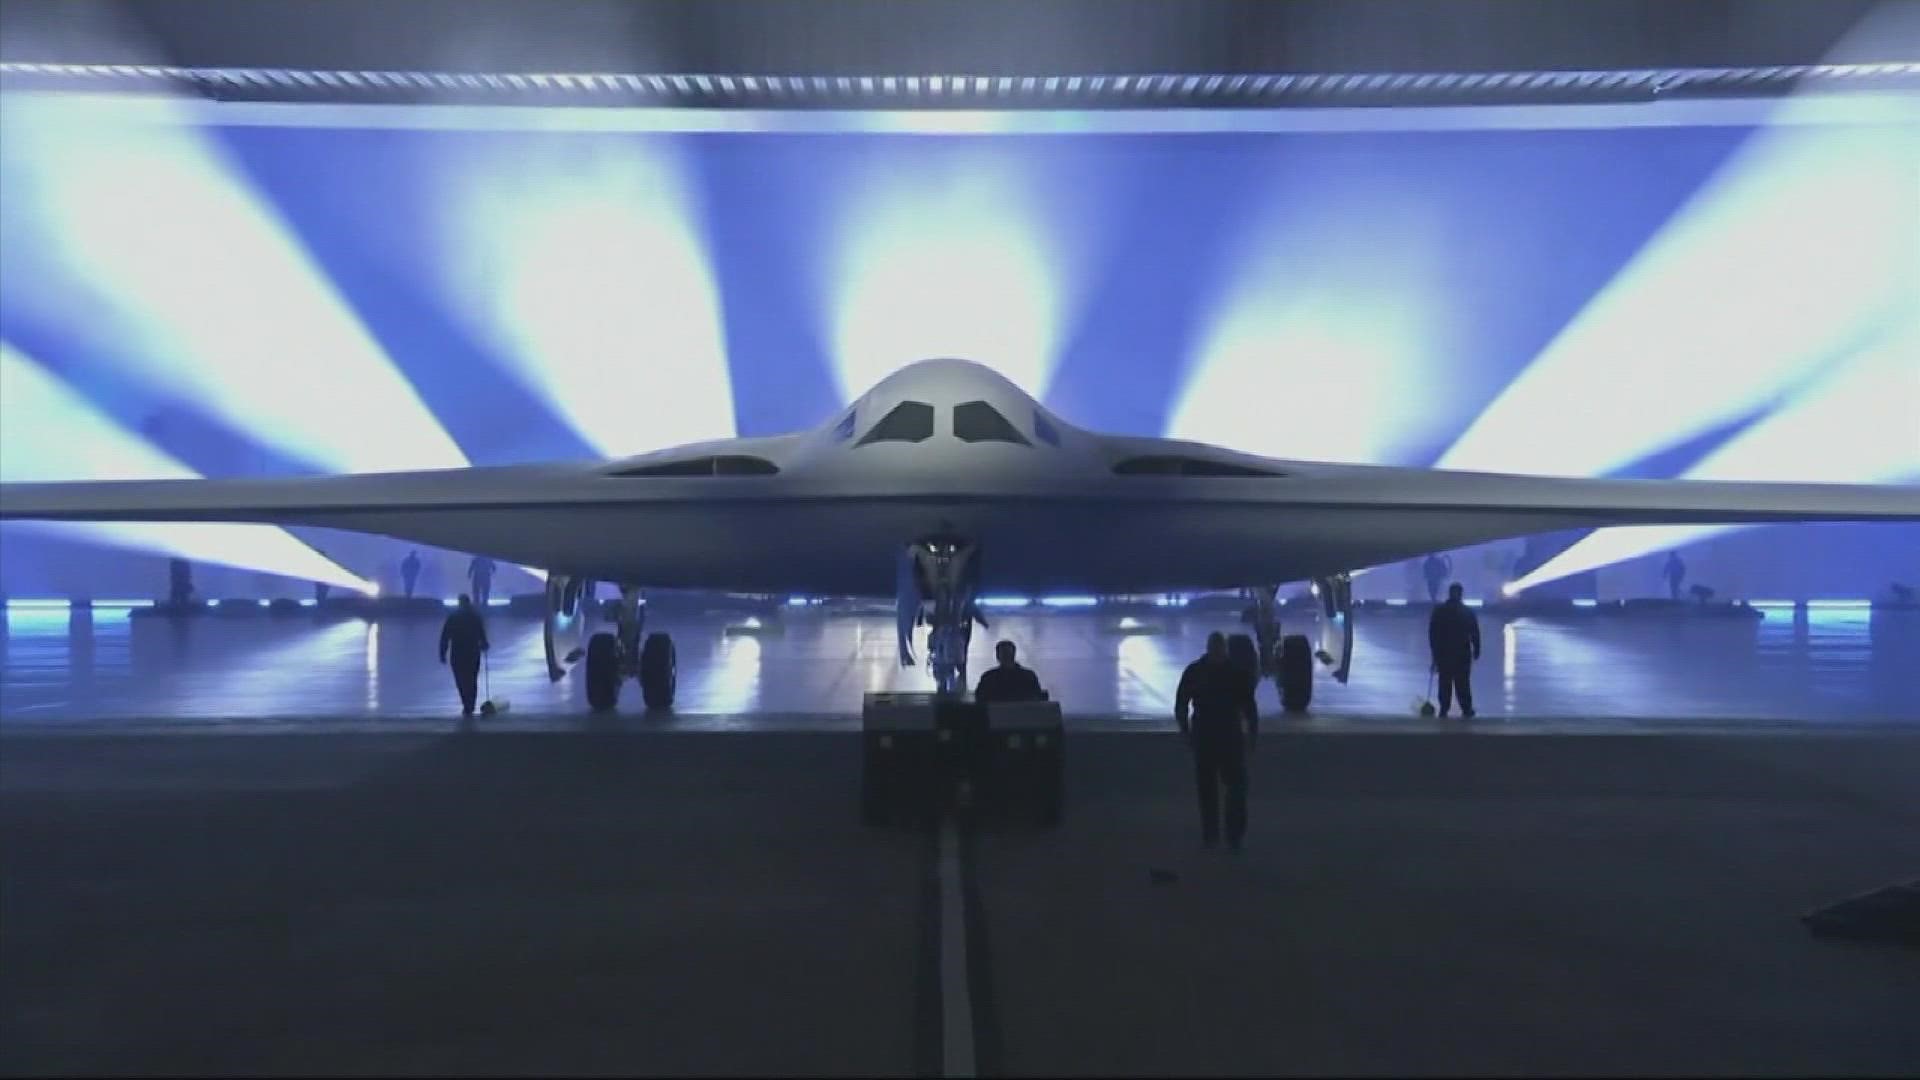 The B-21 Raider is the first new American bomber aircraft in more than 30 years and makes its public debut after years of secret development.